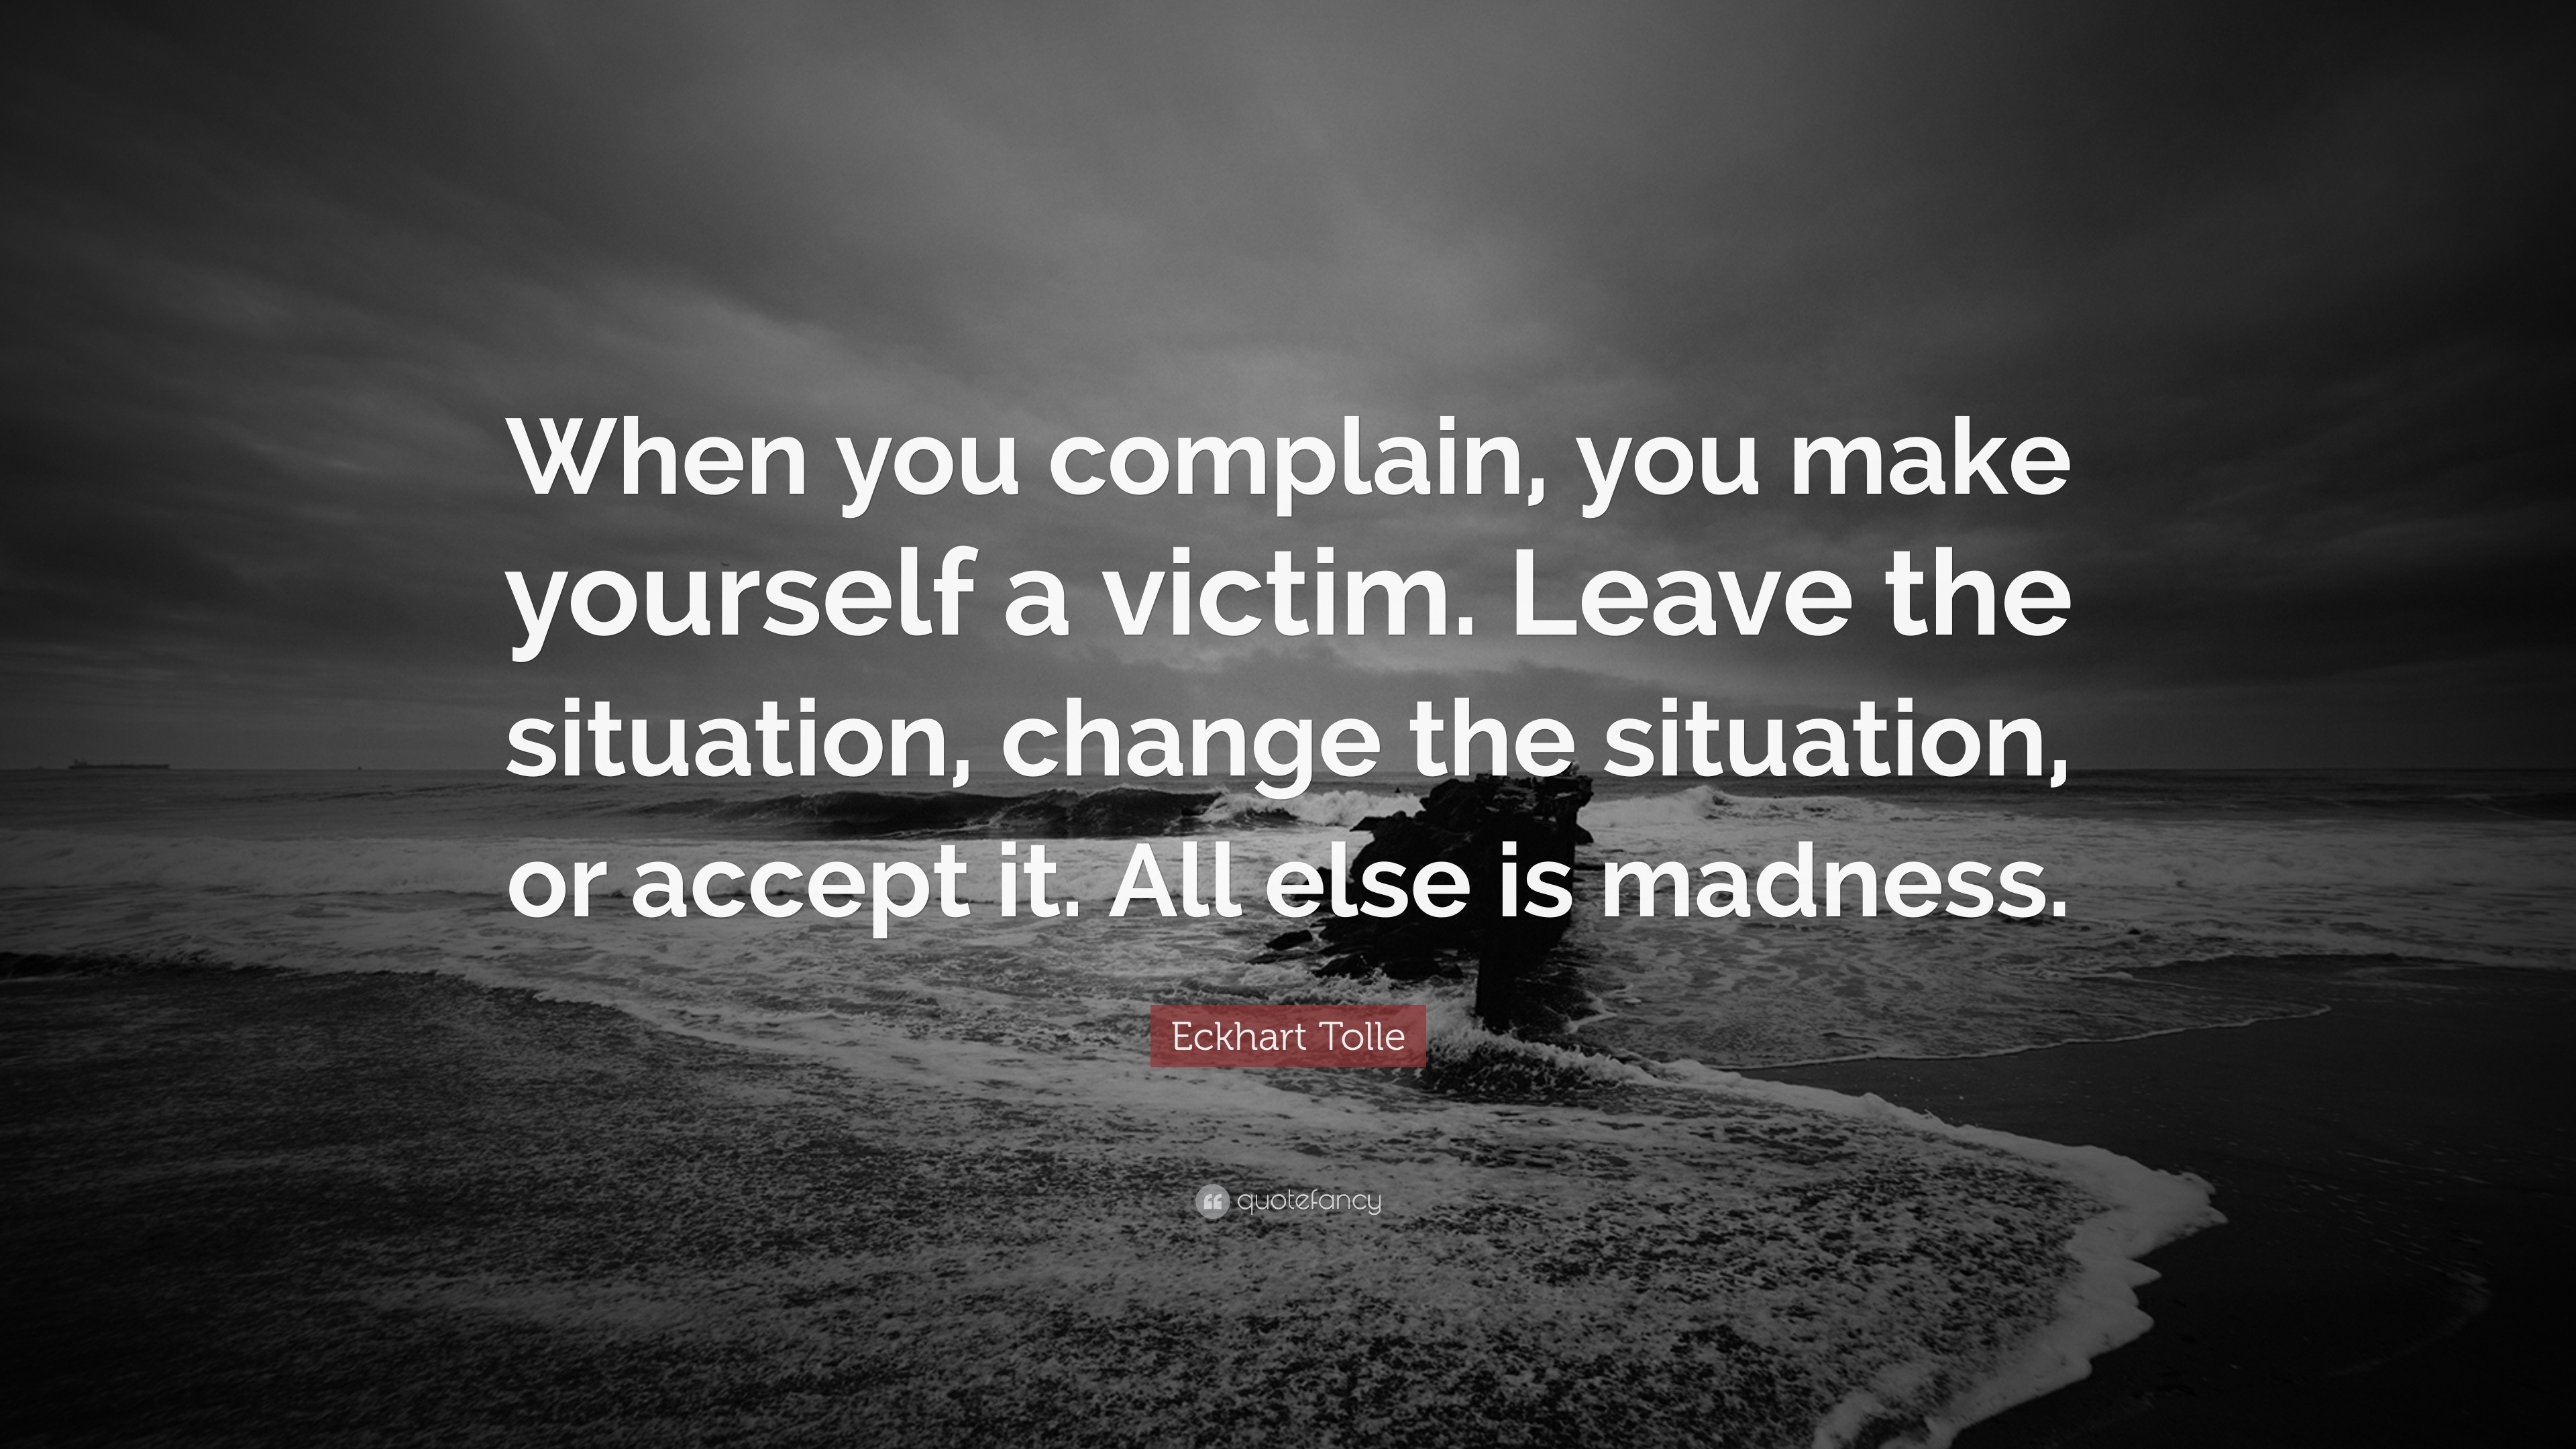 Eckhart Tolle Quote: “When you complain, you make yourself a victim ...